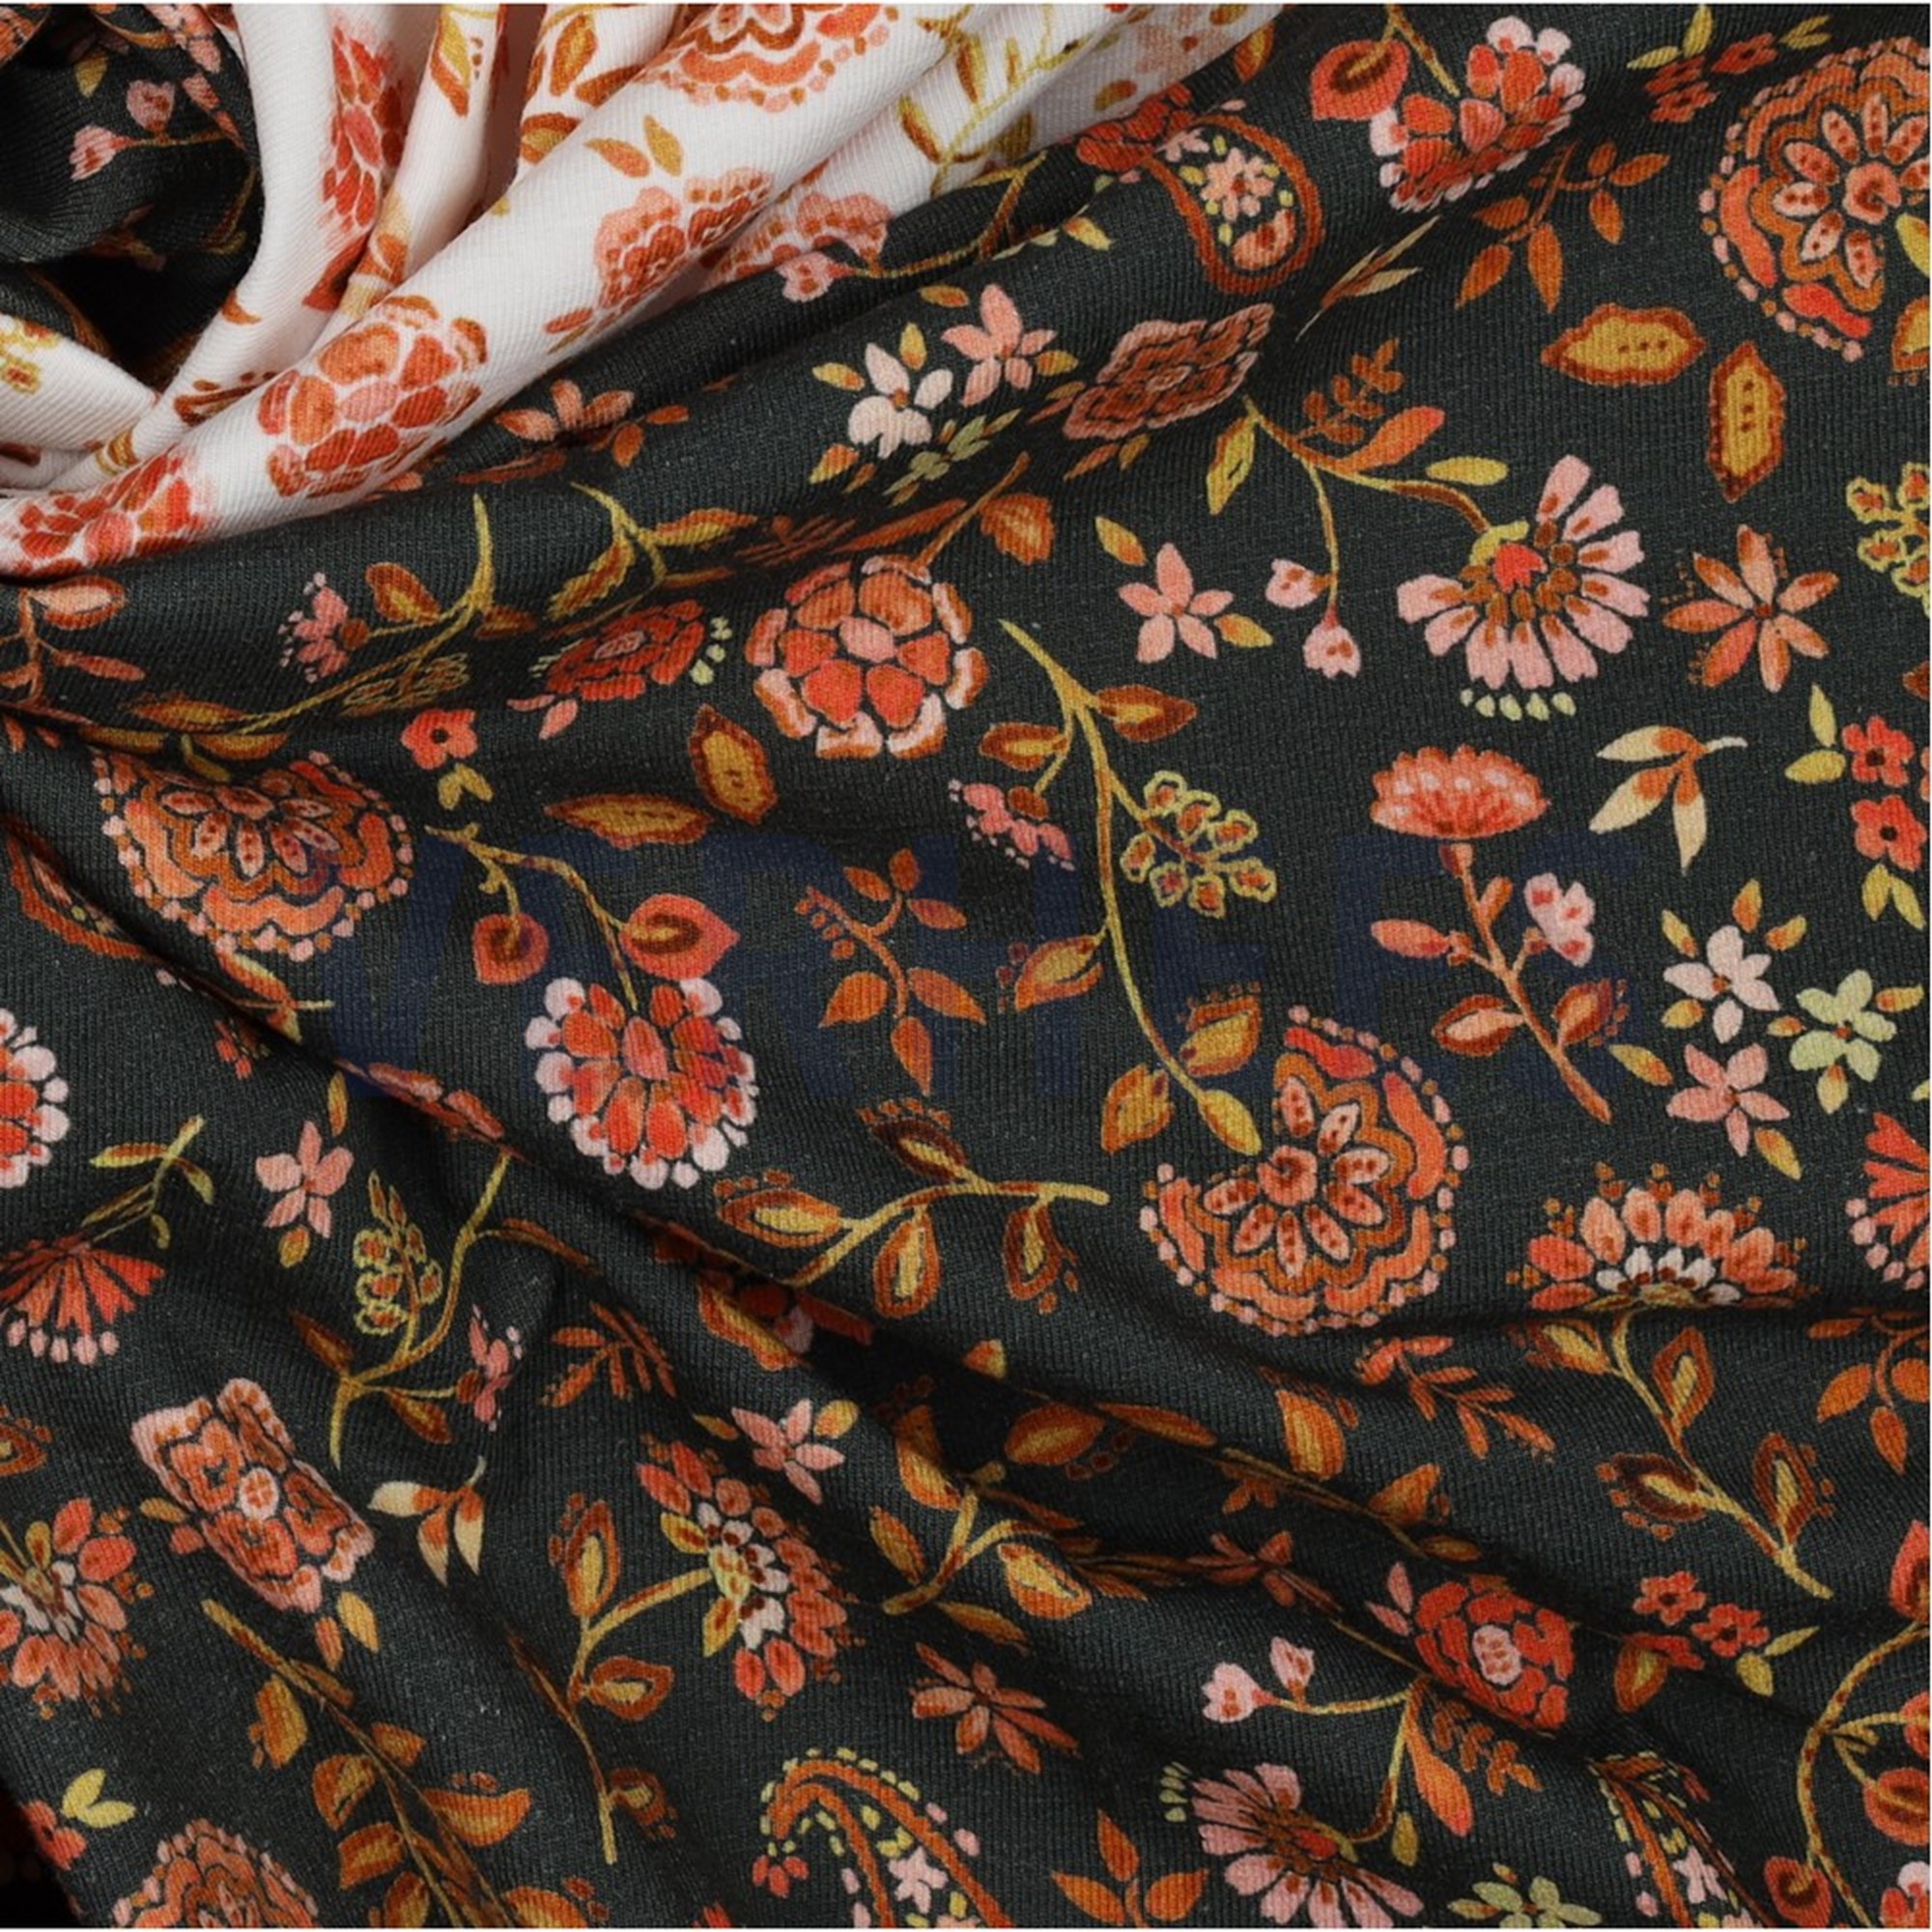 JERSEY DIGITAL PAISLEY FLOWERS ARMY GREEN (high resolution) #3